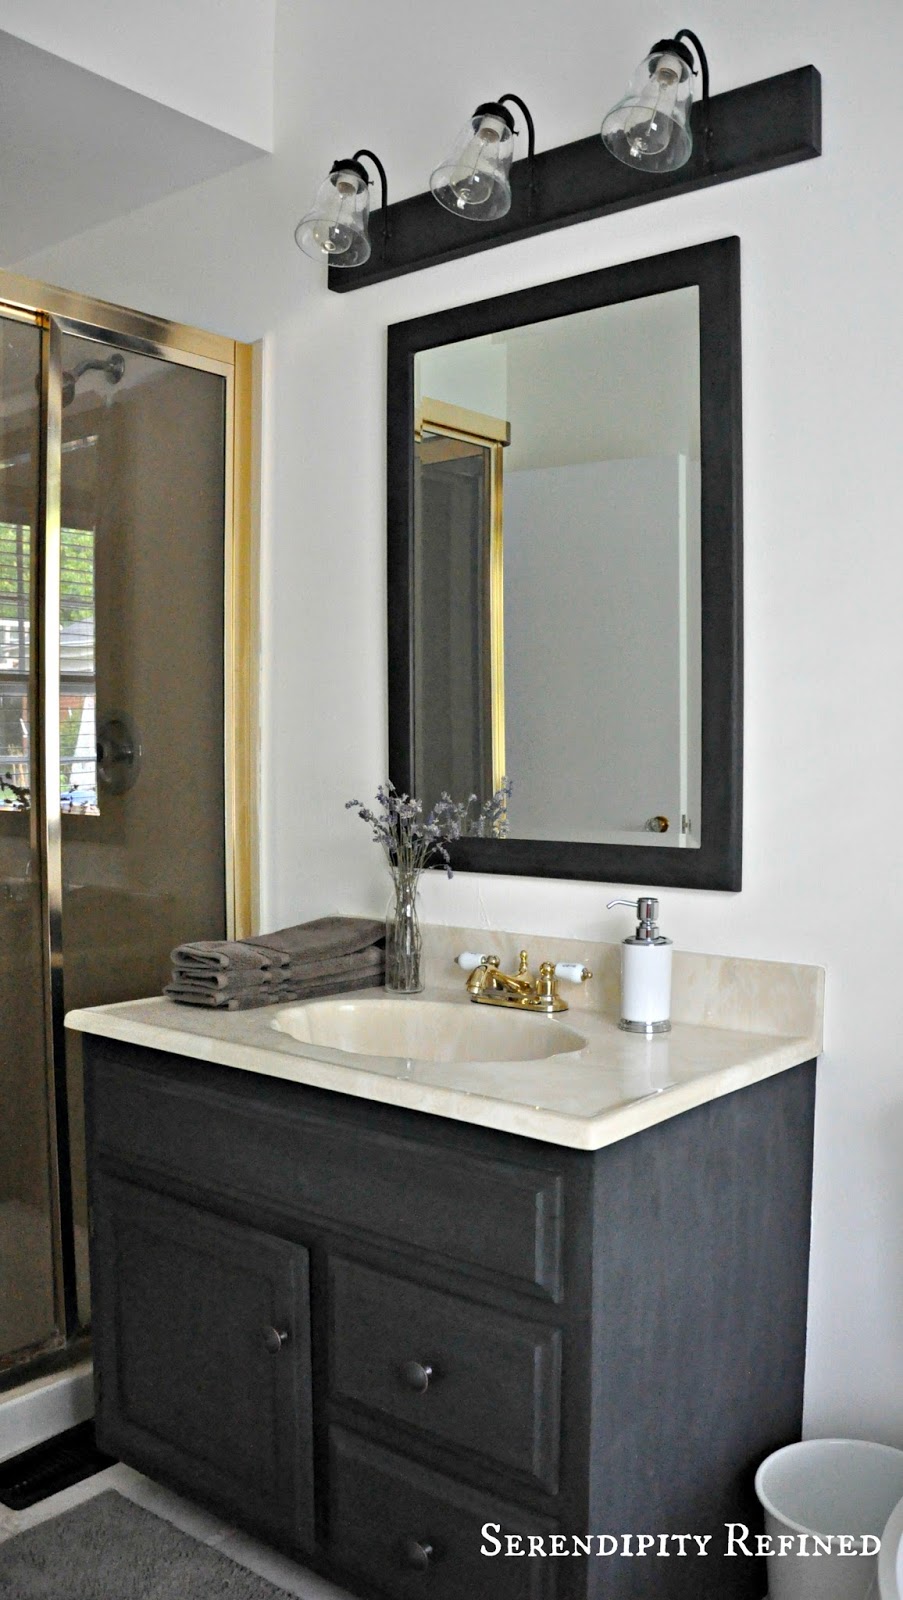 globes  Bathroom glass Serendipity to Brass Oak Fixtures How Refined: painting Update and